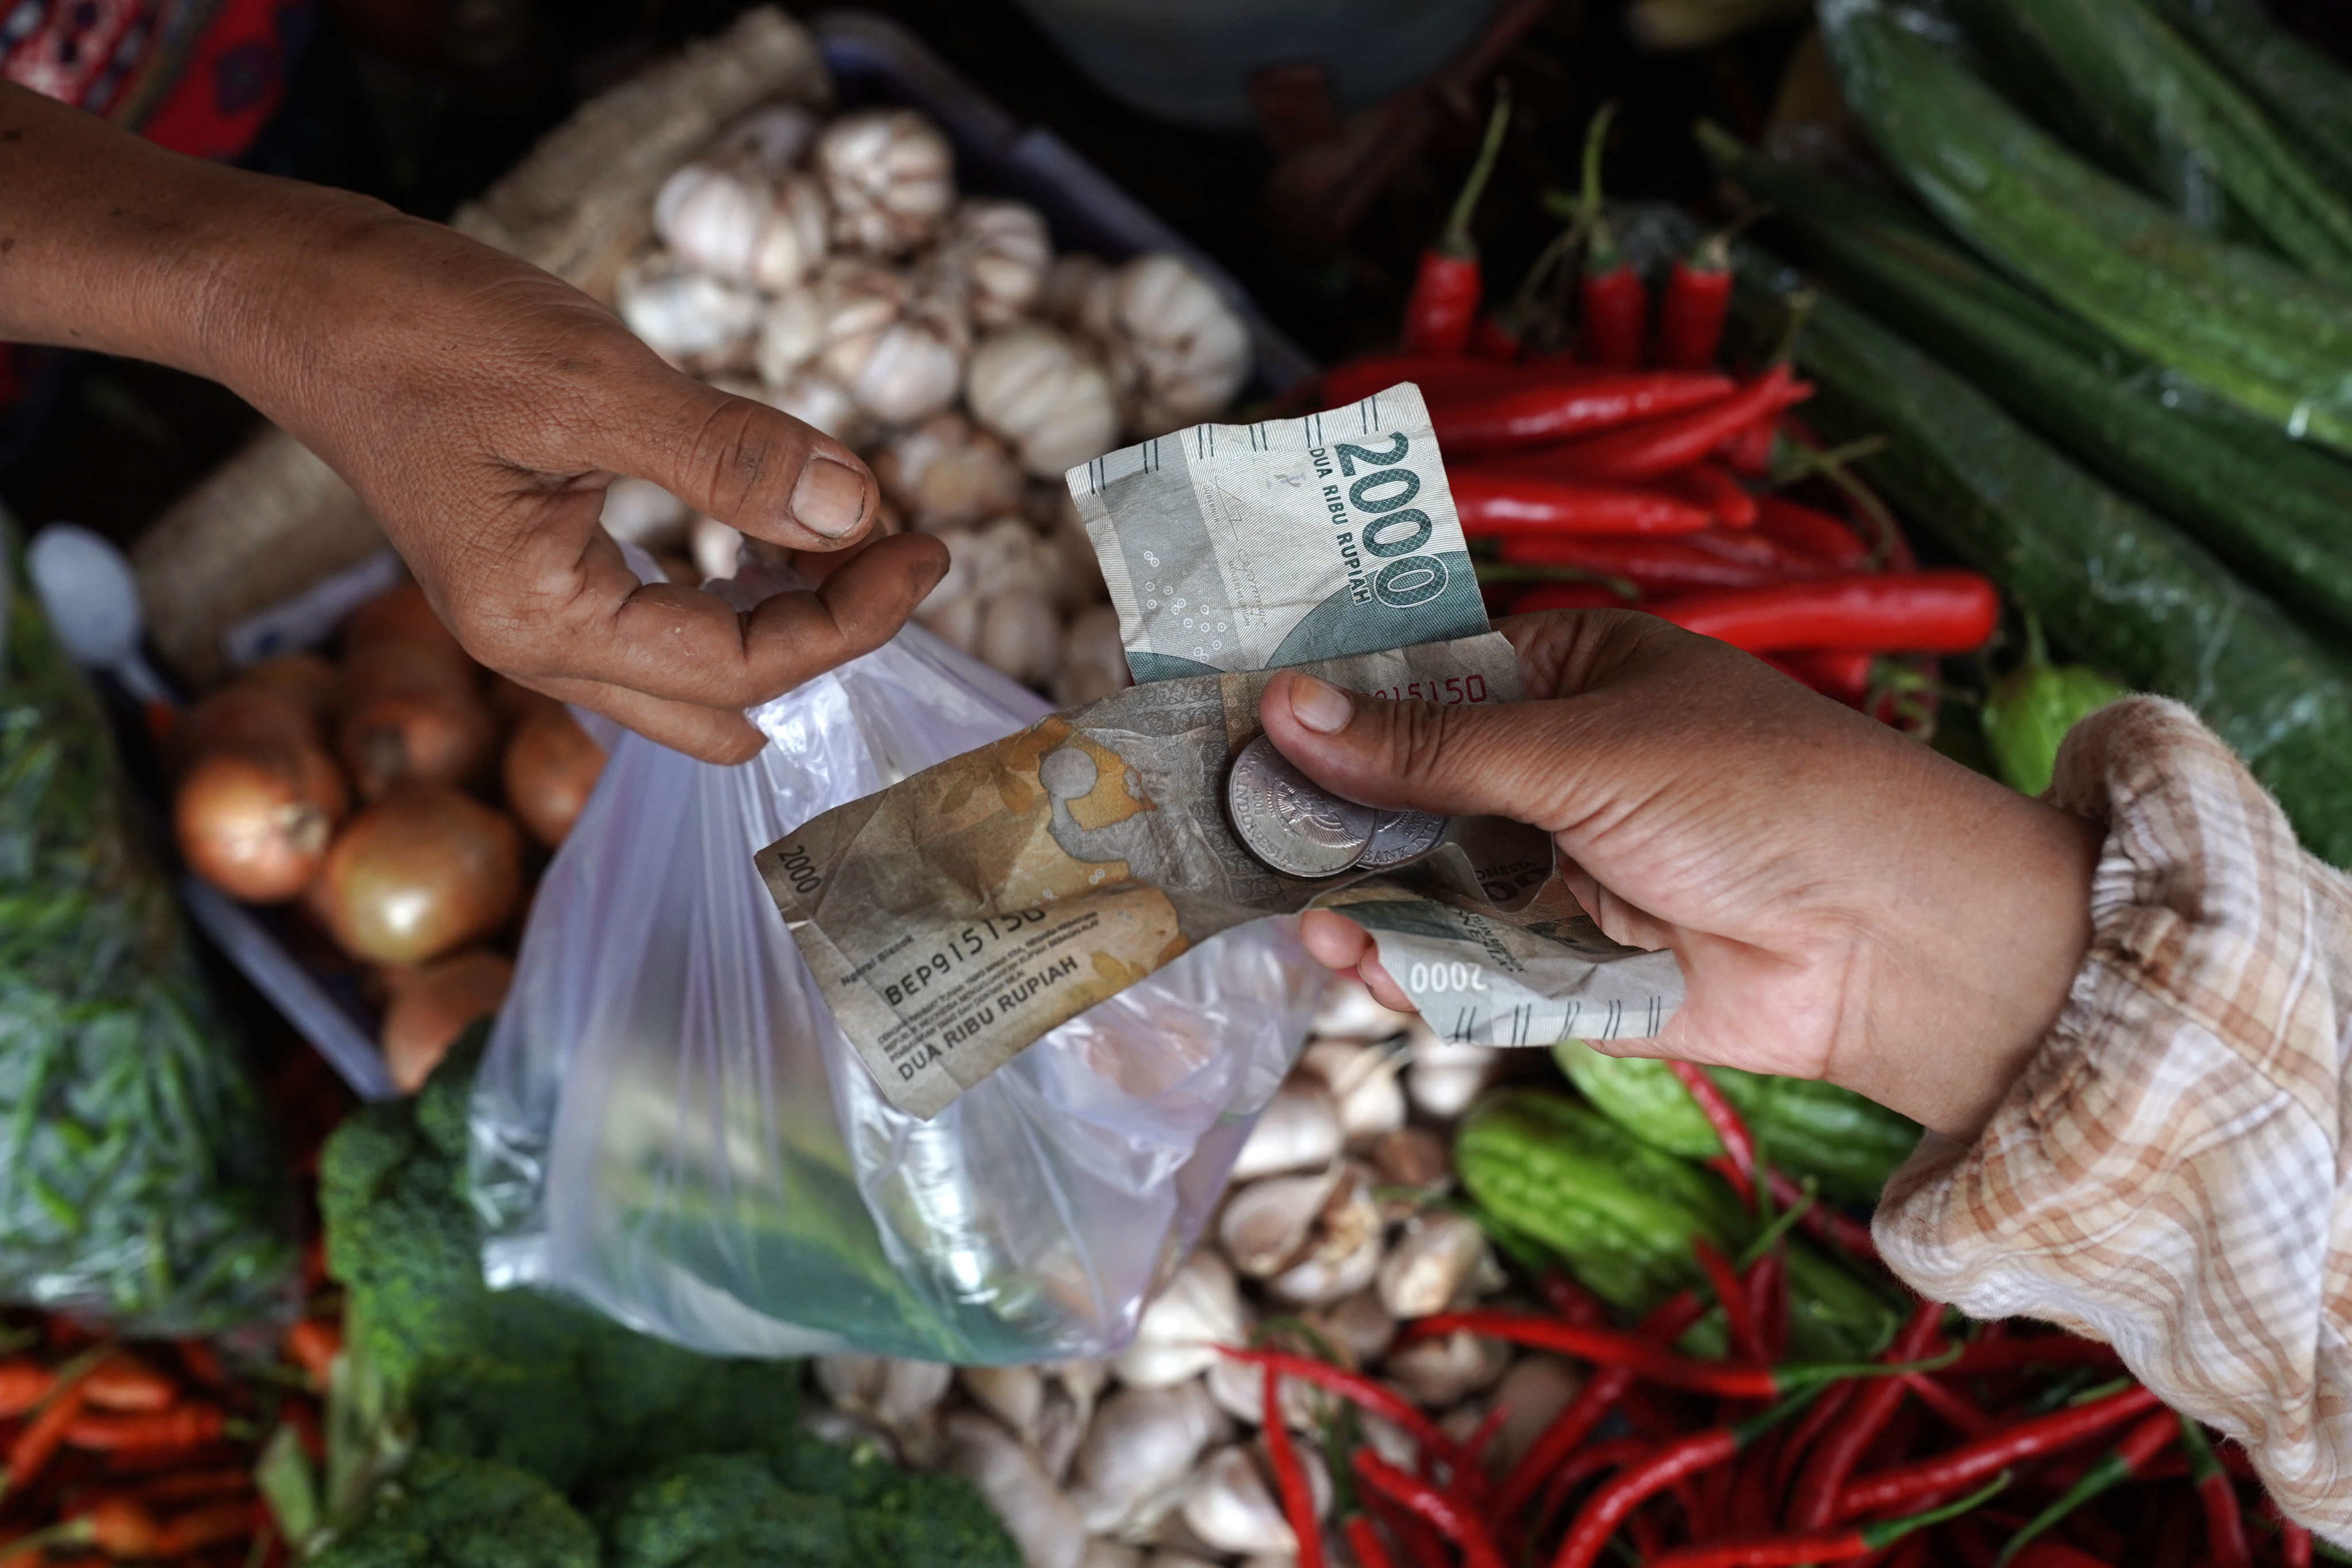 Indonesian rupiah are exchanged at a vegetable stall in Jakarta on August 18, 2020. The rupiah was among the currencies worst hit in 1997. Asian currency depreciation this time is more the result of a strong dollar, not a symptom of weak economic fundamentals. Photo: Bloomberg